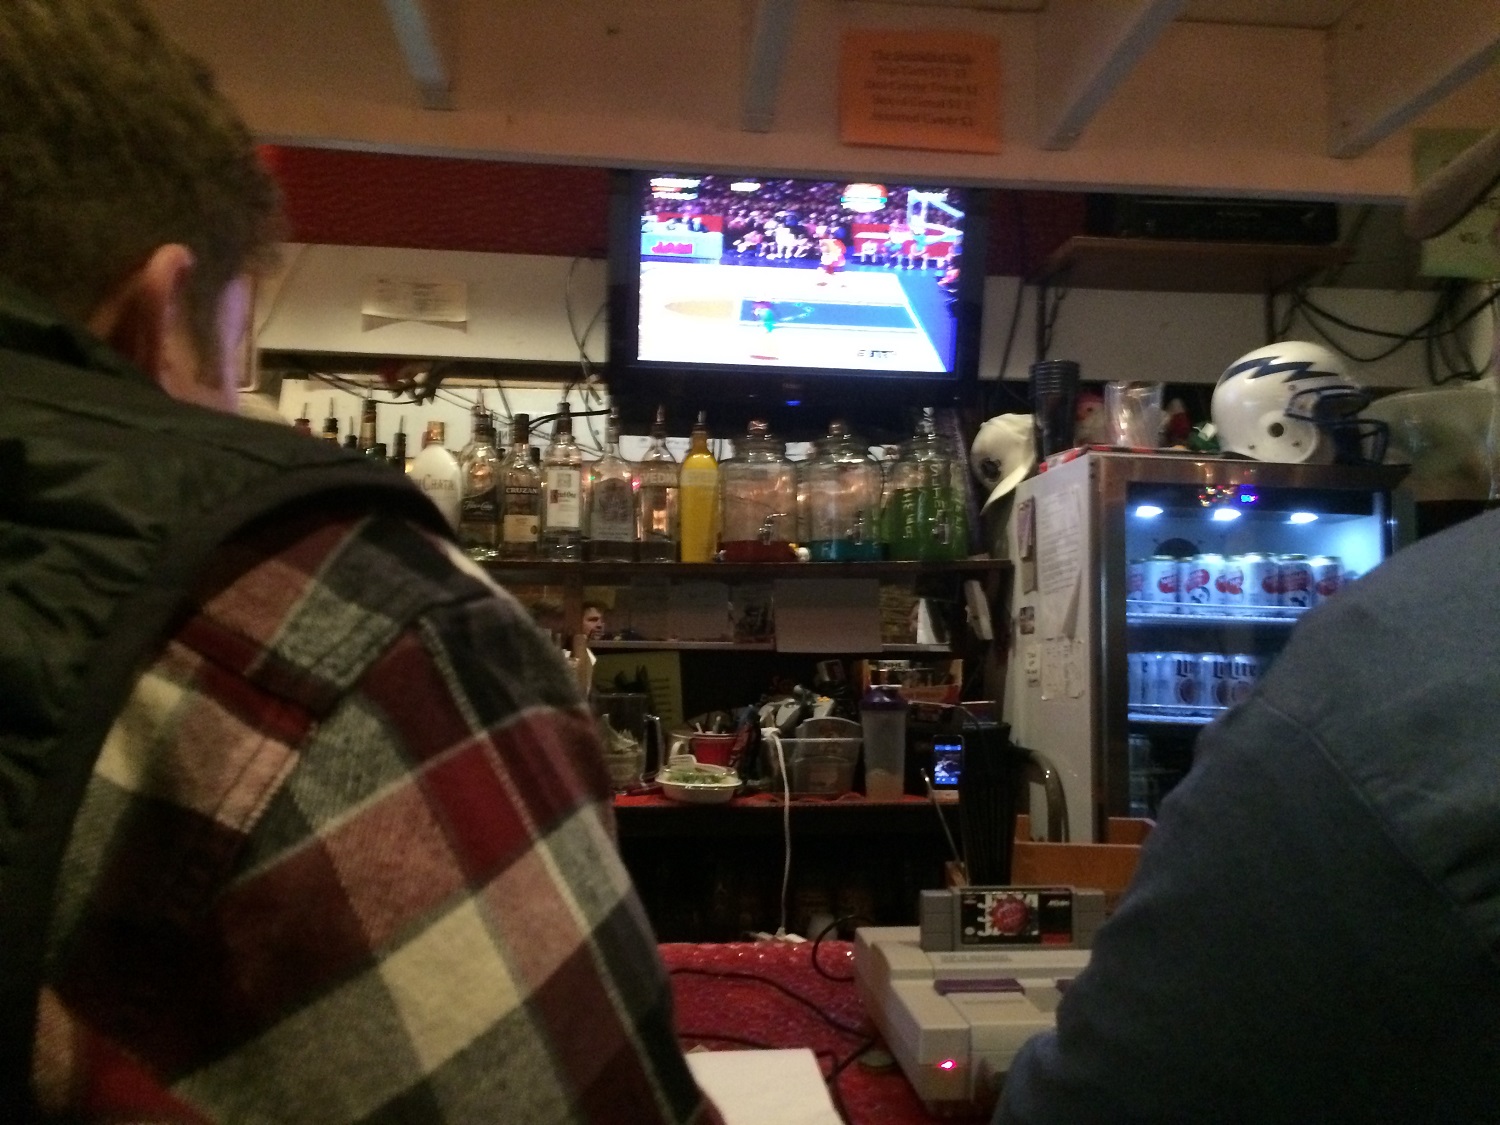 A view of the television at the bar to which the Super Nintendo system was attached. (WTOP/Noah Frank)